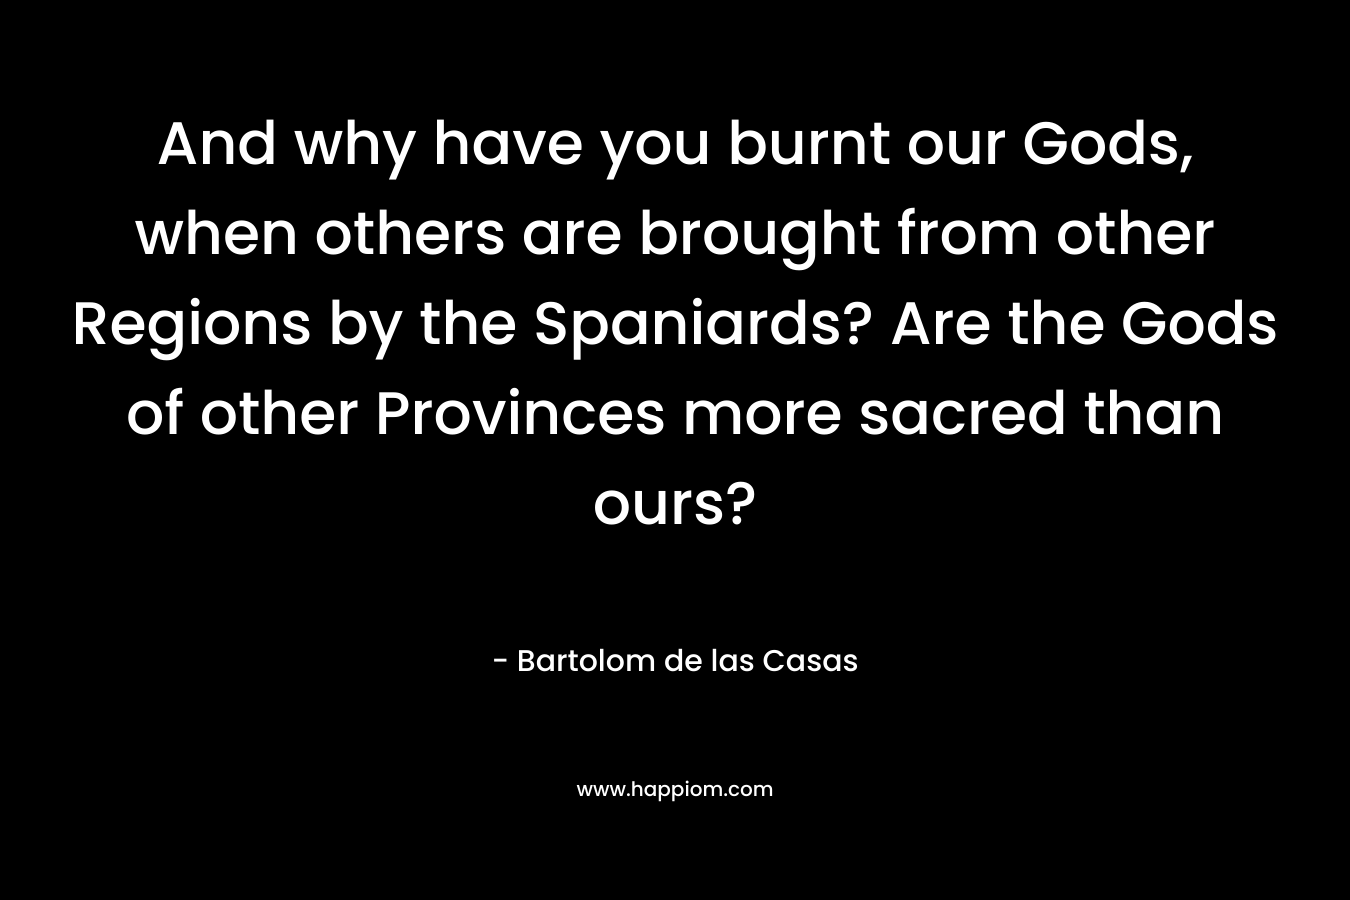 And why have you burnt our Gods, when others are brought from other Regions by the Spaniards? Are the Gods of other Provinces more sacred than ours? – Bartolom de las Casas